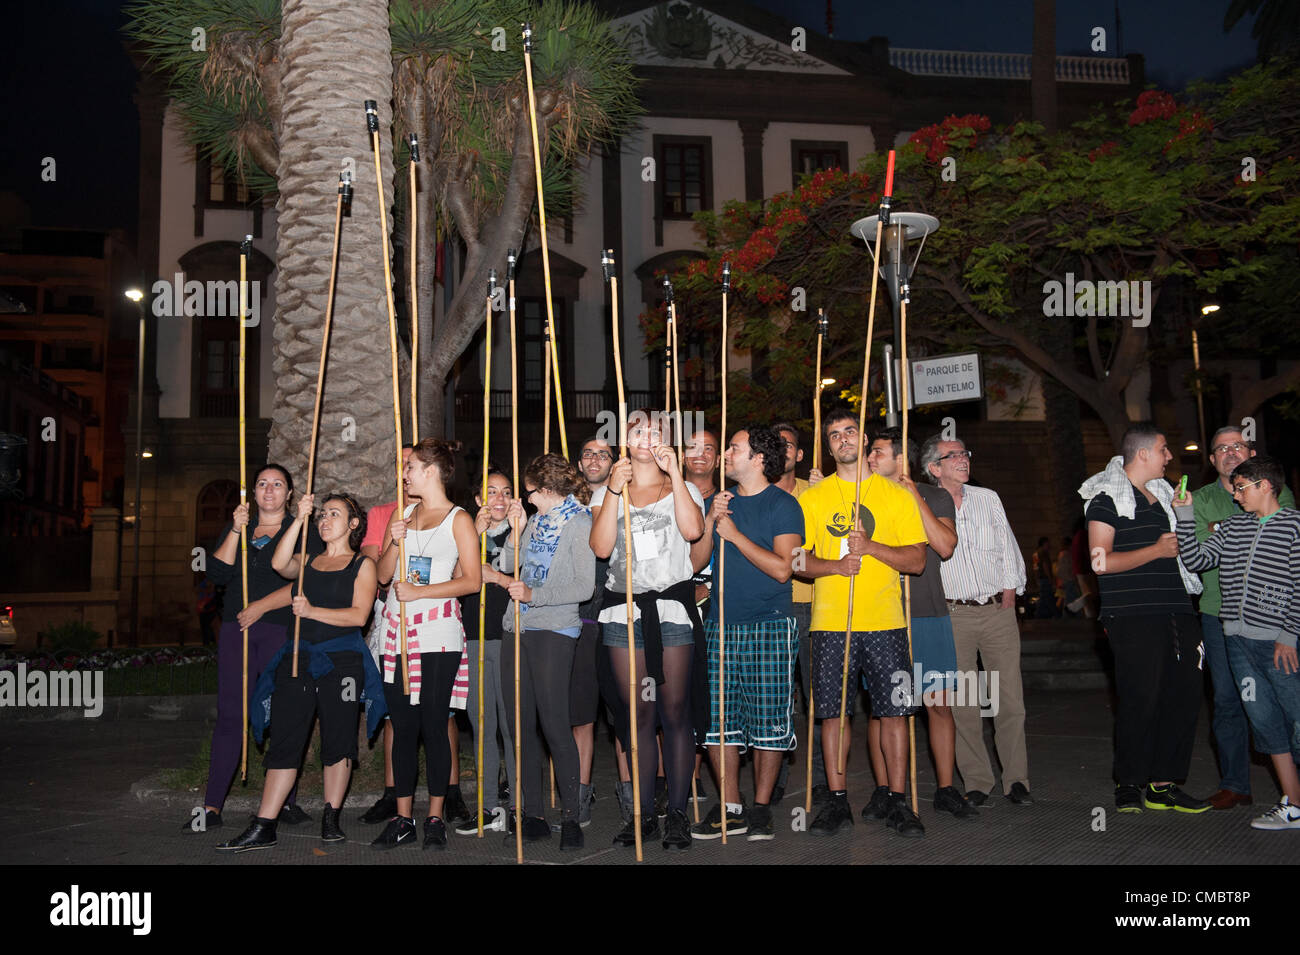 July 12, 2012 – Las Palmas, Canary Islands, Spain – Theater-group Titanick, from Germany, preparing their performance Firebirds, during Theater, Music and Dance international festival in Las Palmas, Canary Islands, on Thursday 12 July 2012. Stock Photo